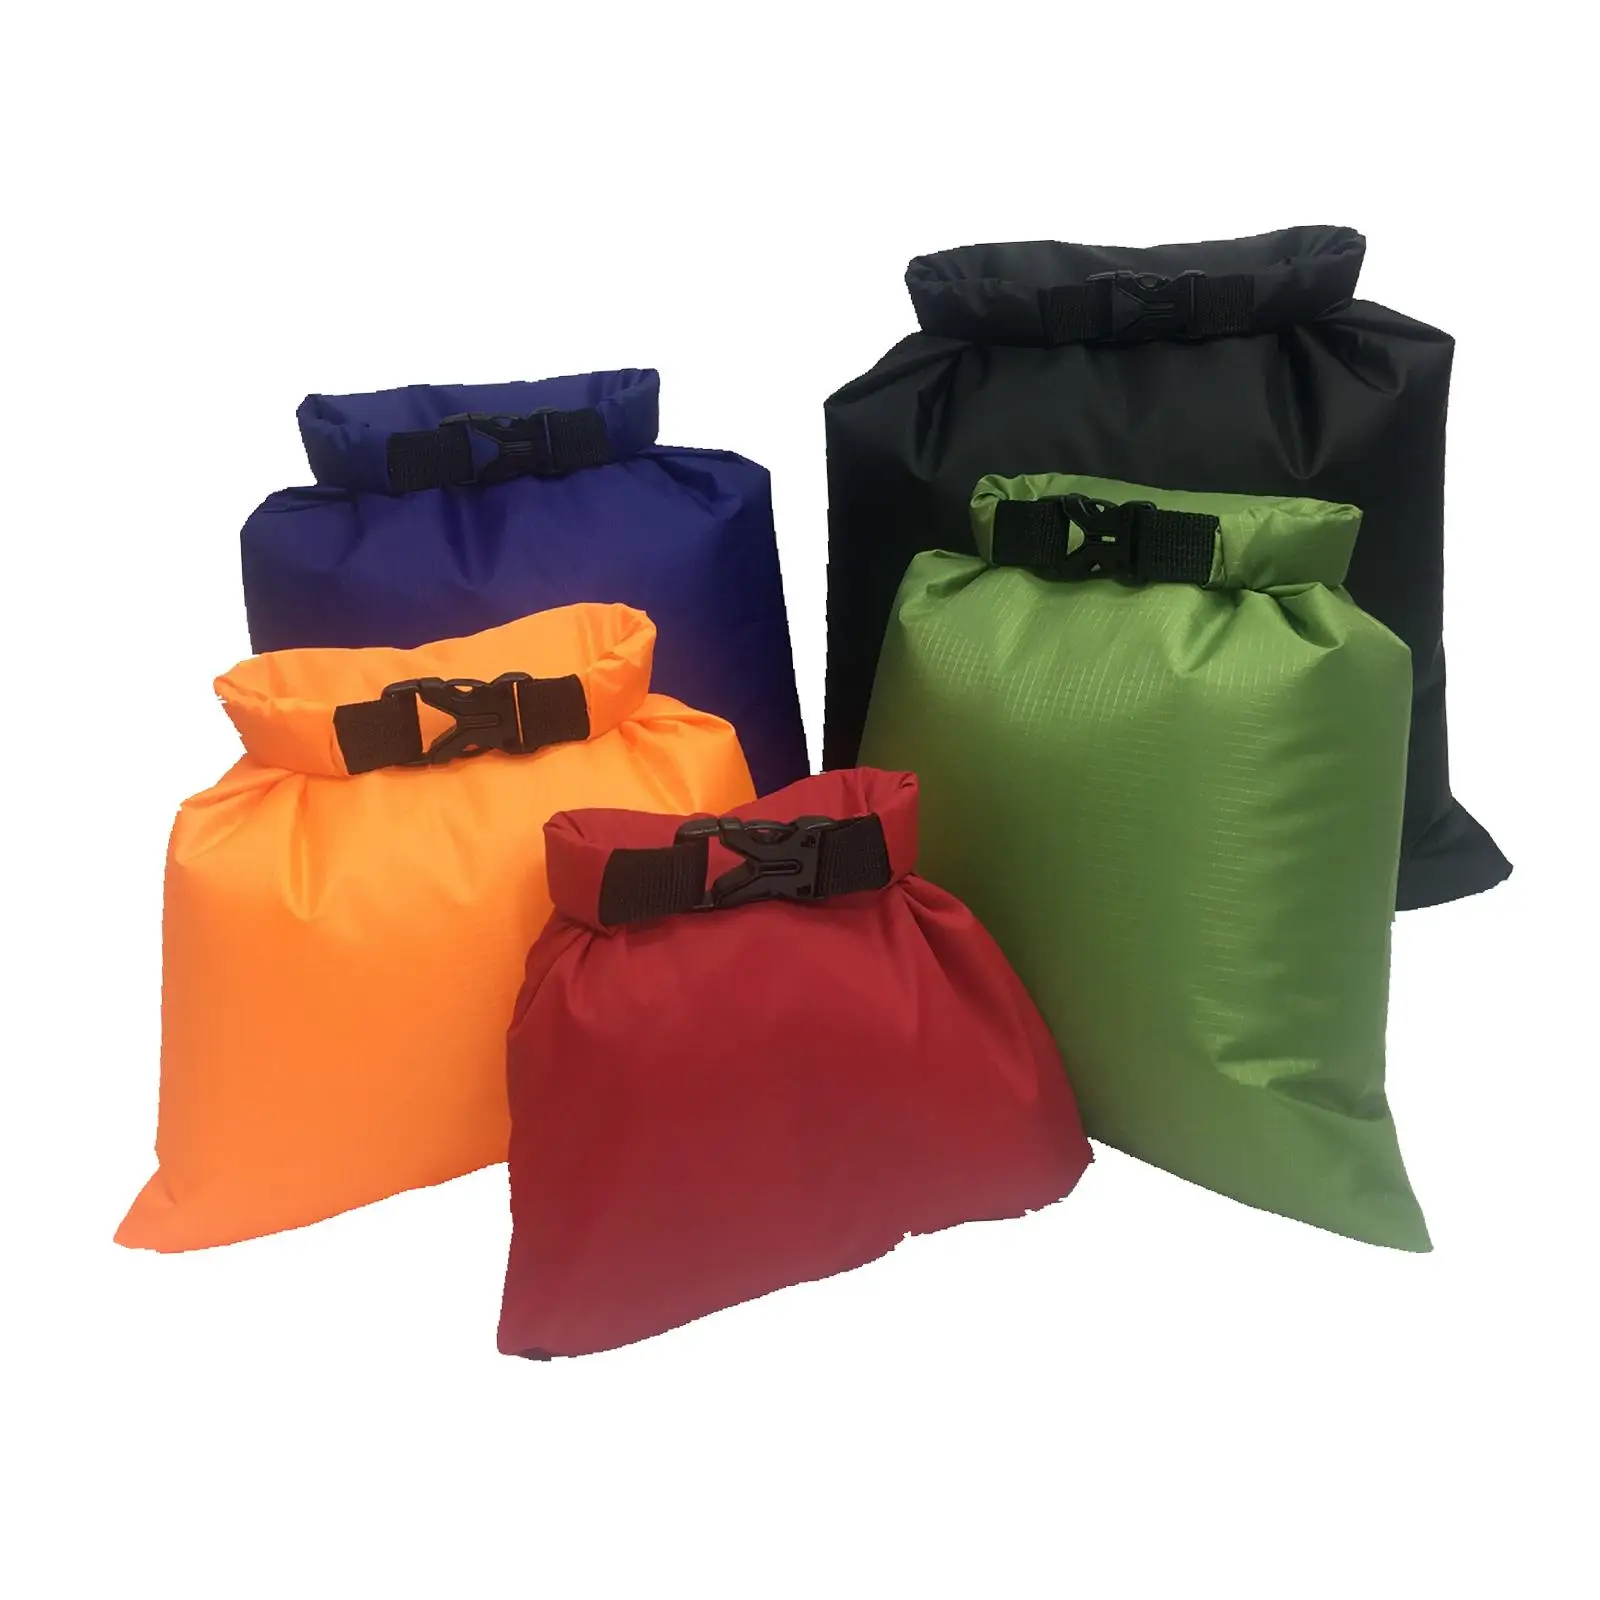 5Pcs Dry Bag Set Waterproof Drying Sack Pouch Outdoor Storage Bag 1.5L /2.5L /3.5L /4.5L /6L for Kayaking Rafting Boating